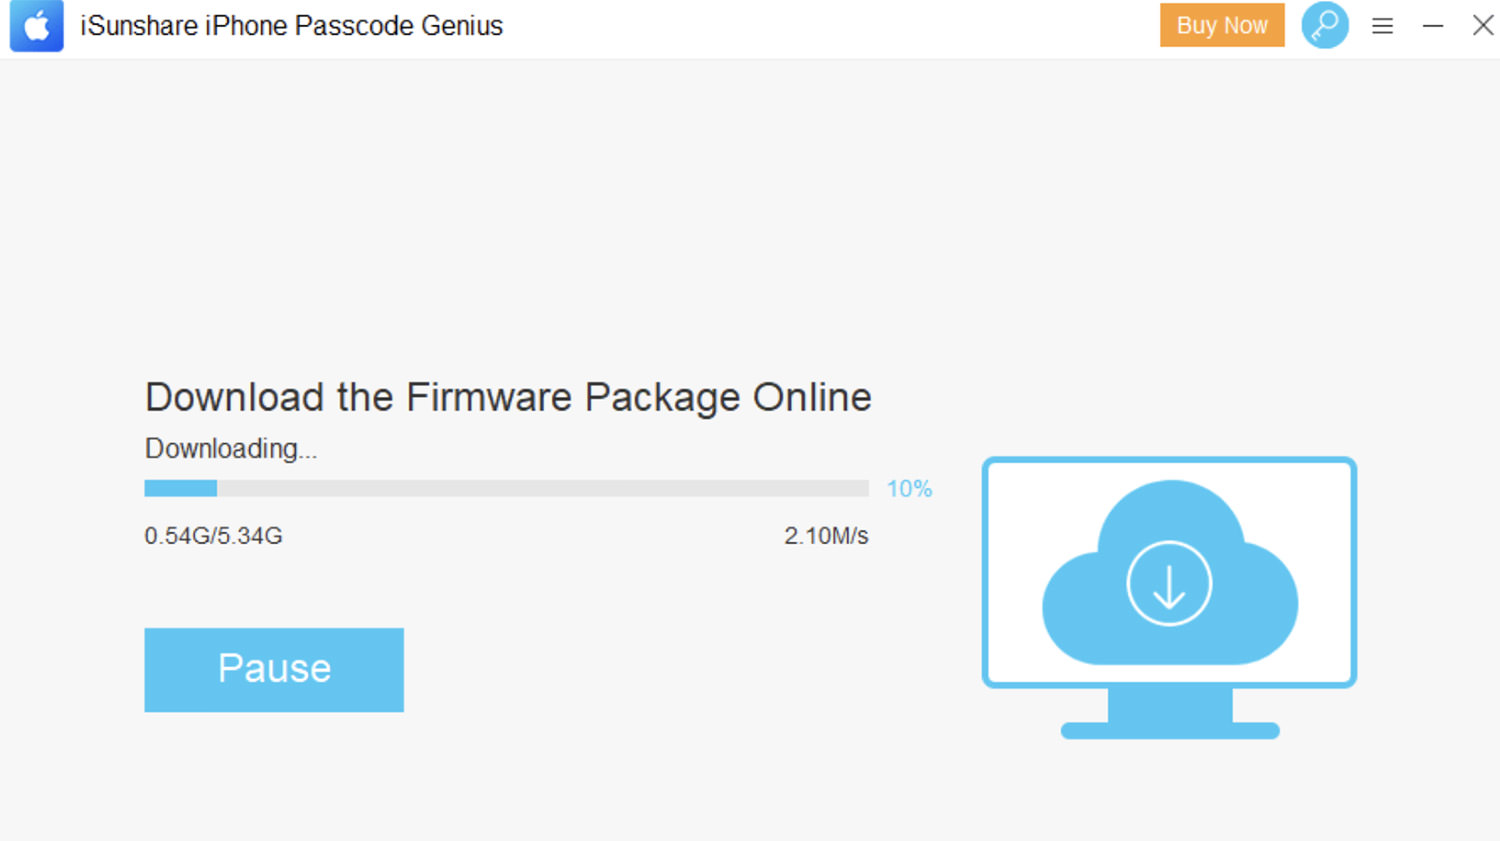 Downloading firmware package